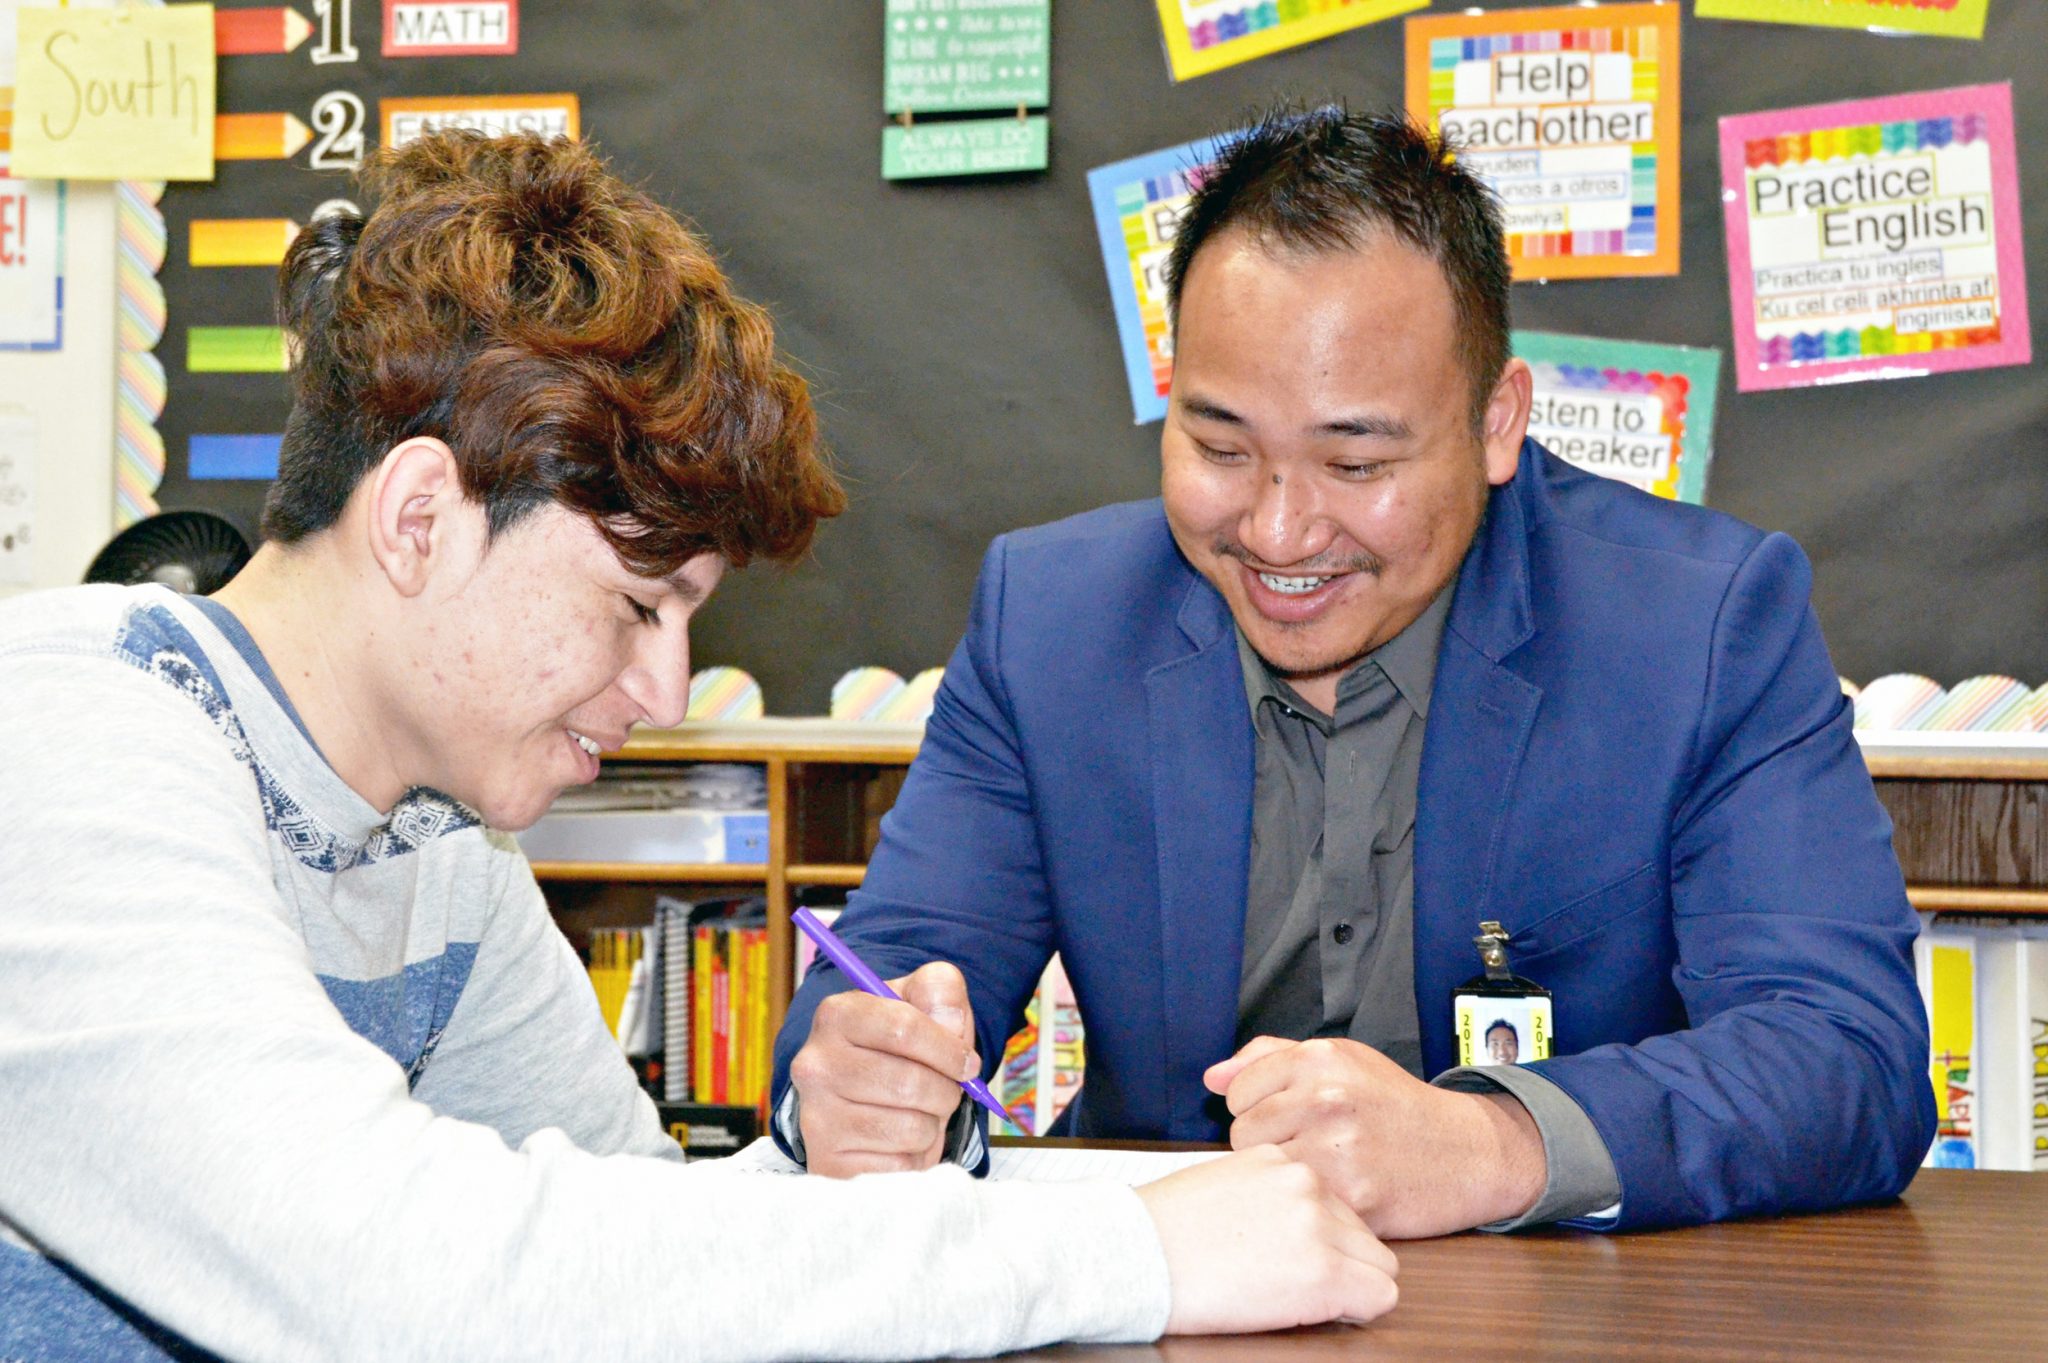 Sam Ouk, an English Language Coordinator for Faribault Public Schools, works with a student.